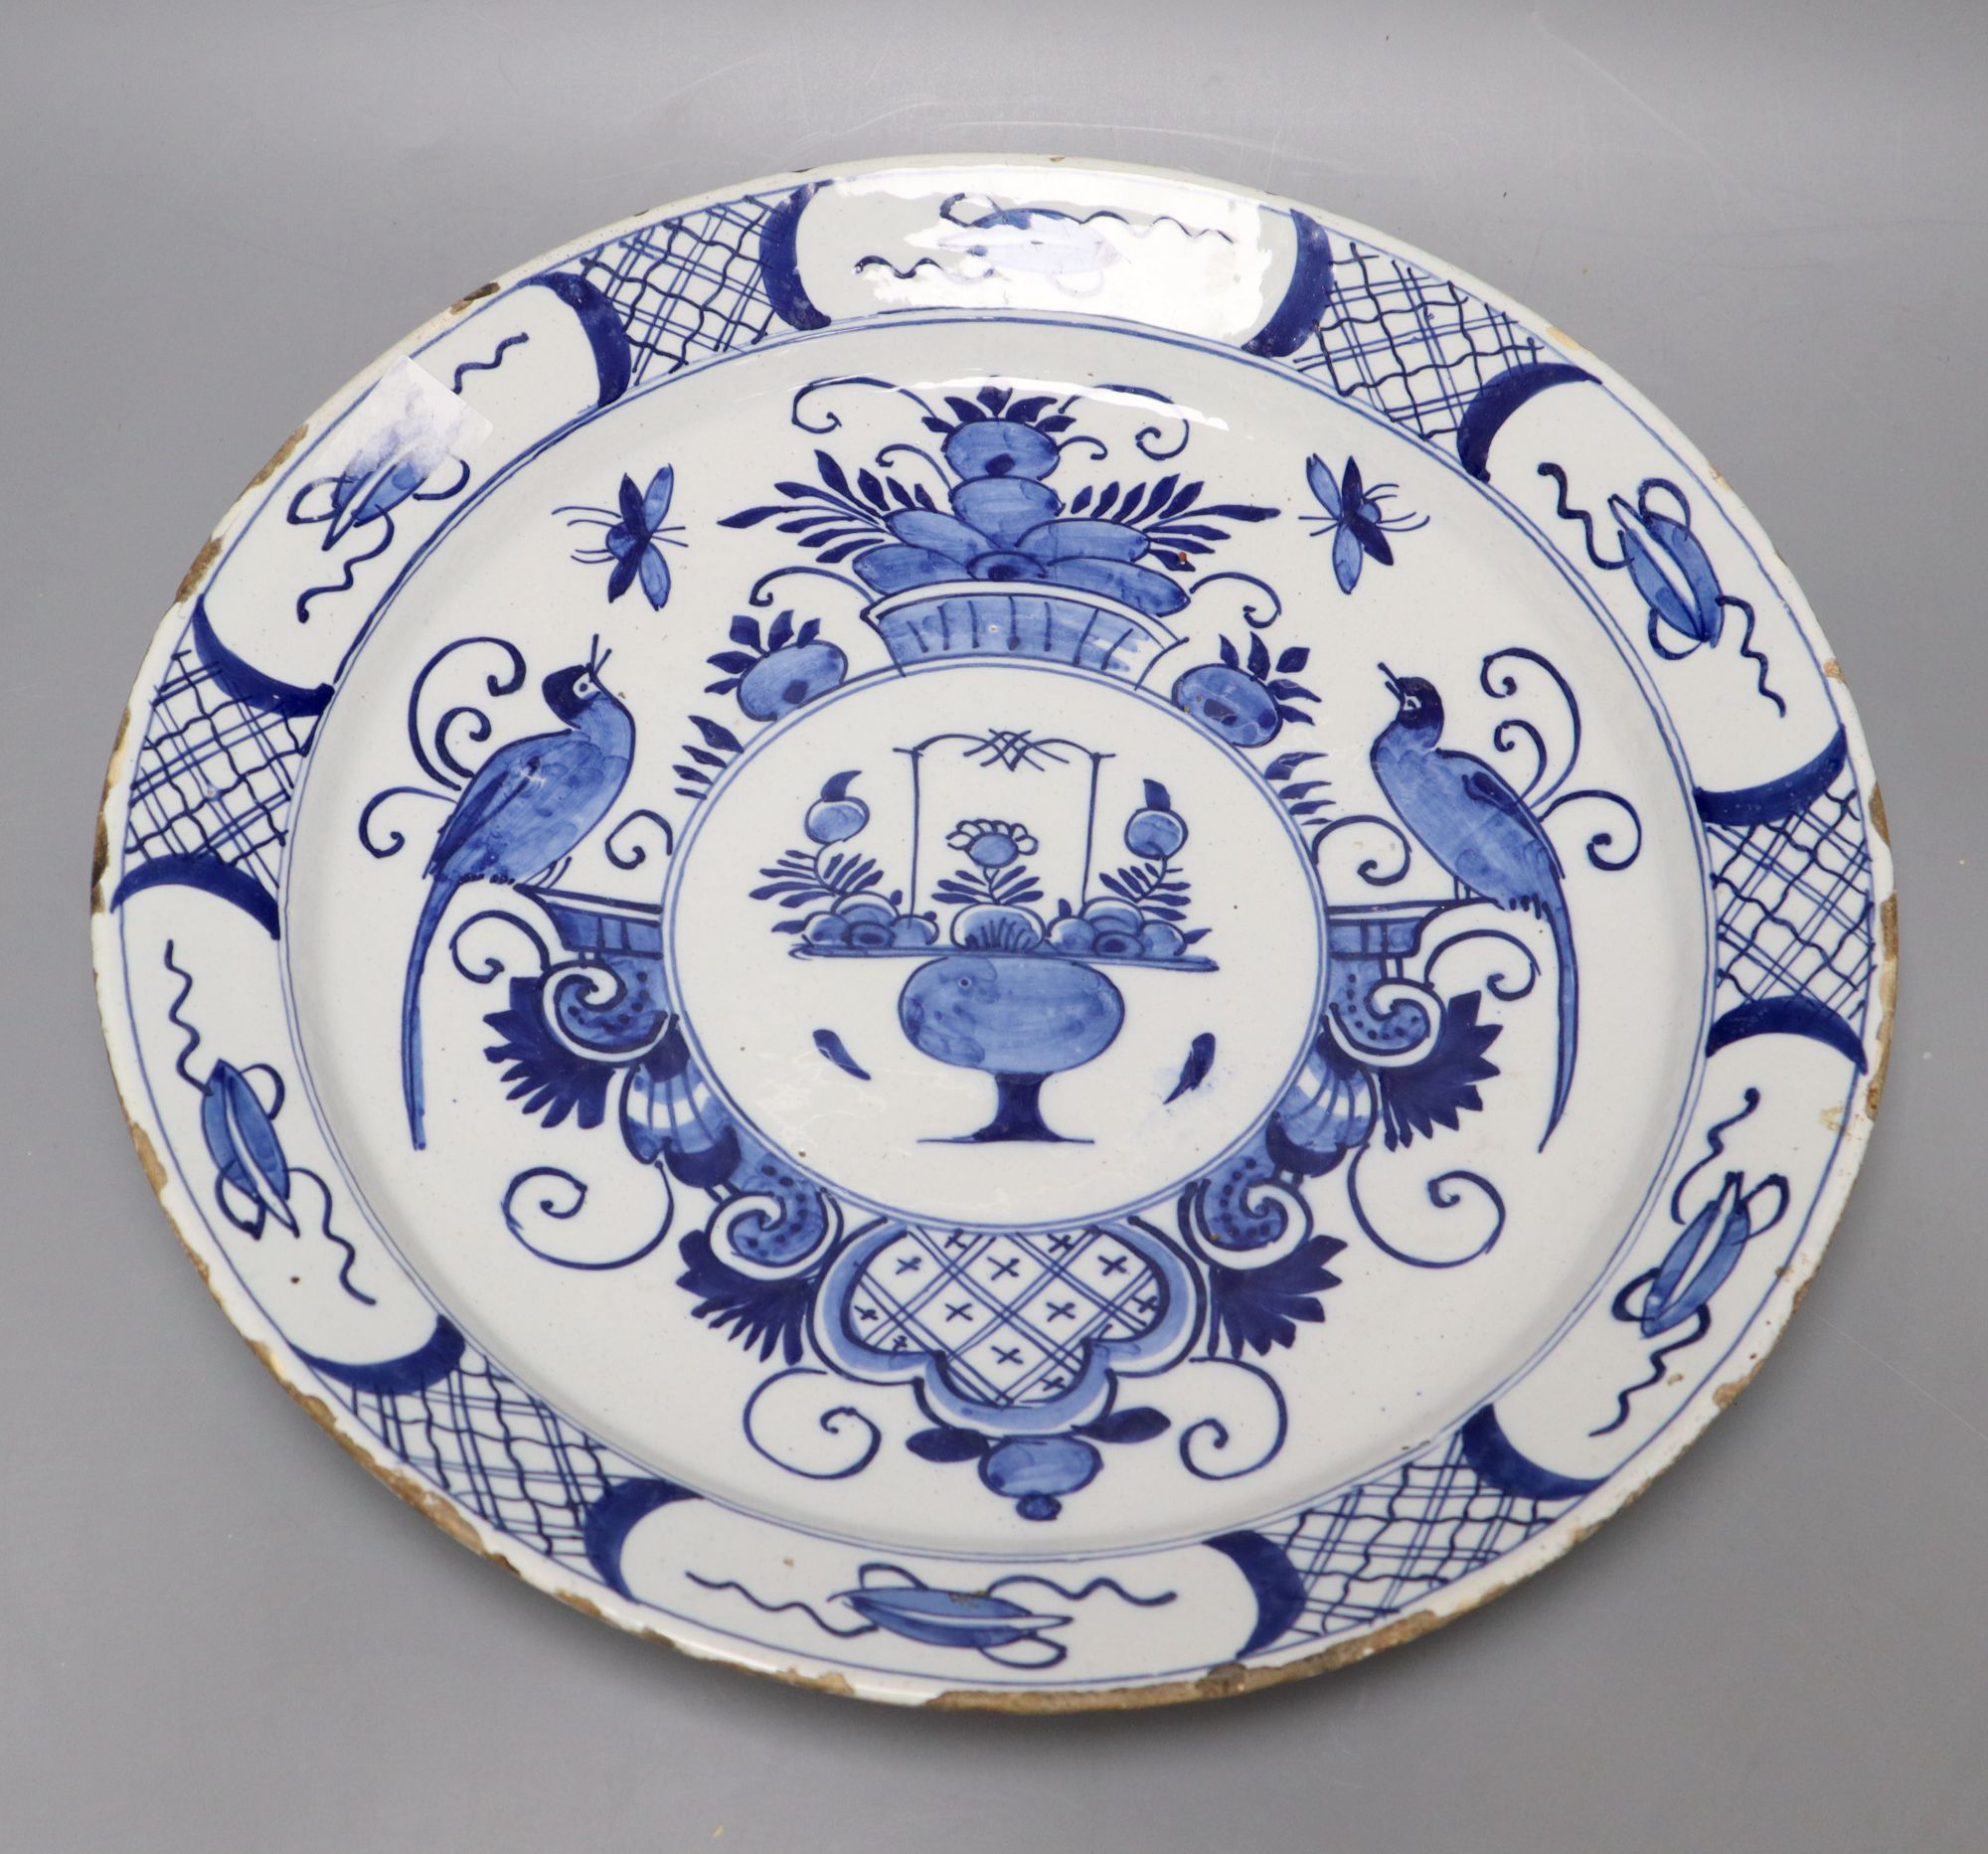 An 18th century blue and white Delft charger, 35cm